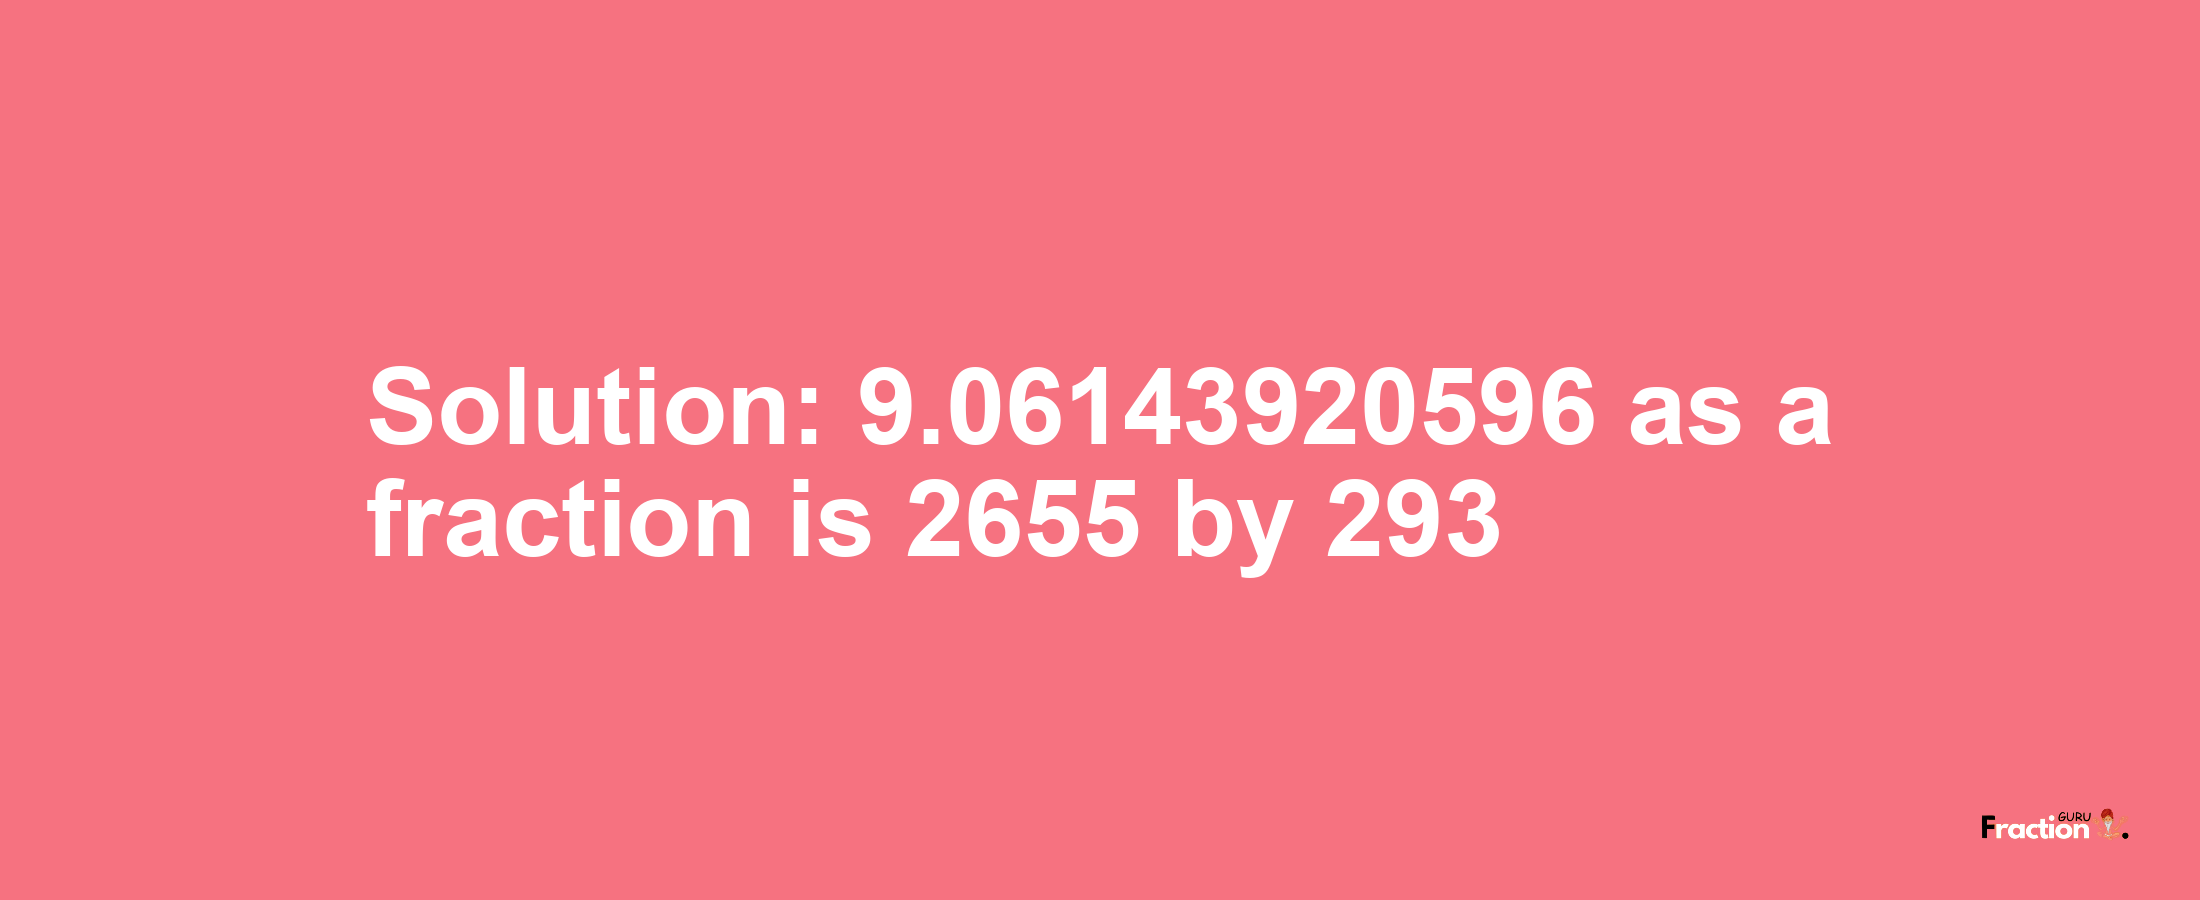 Solution:9.06143920596 as a fraction is 2655/293